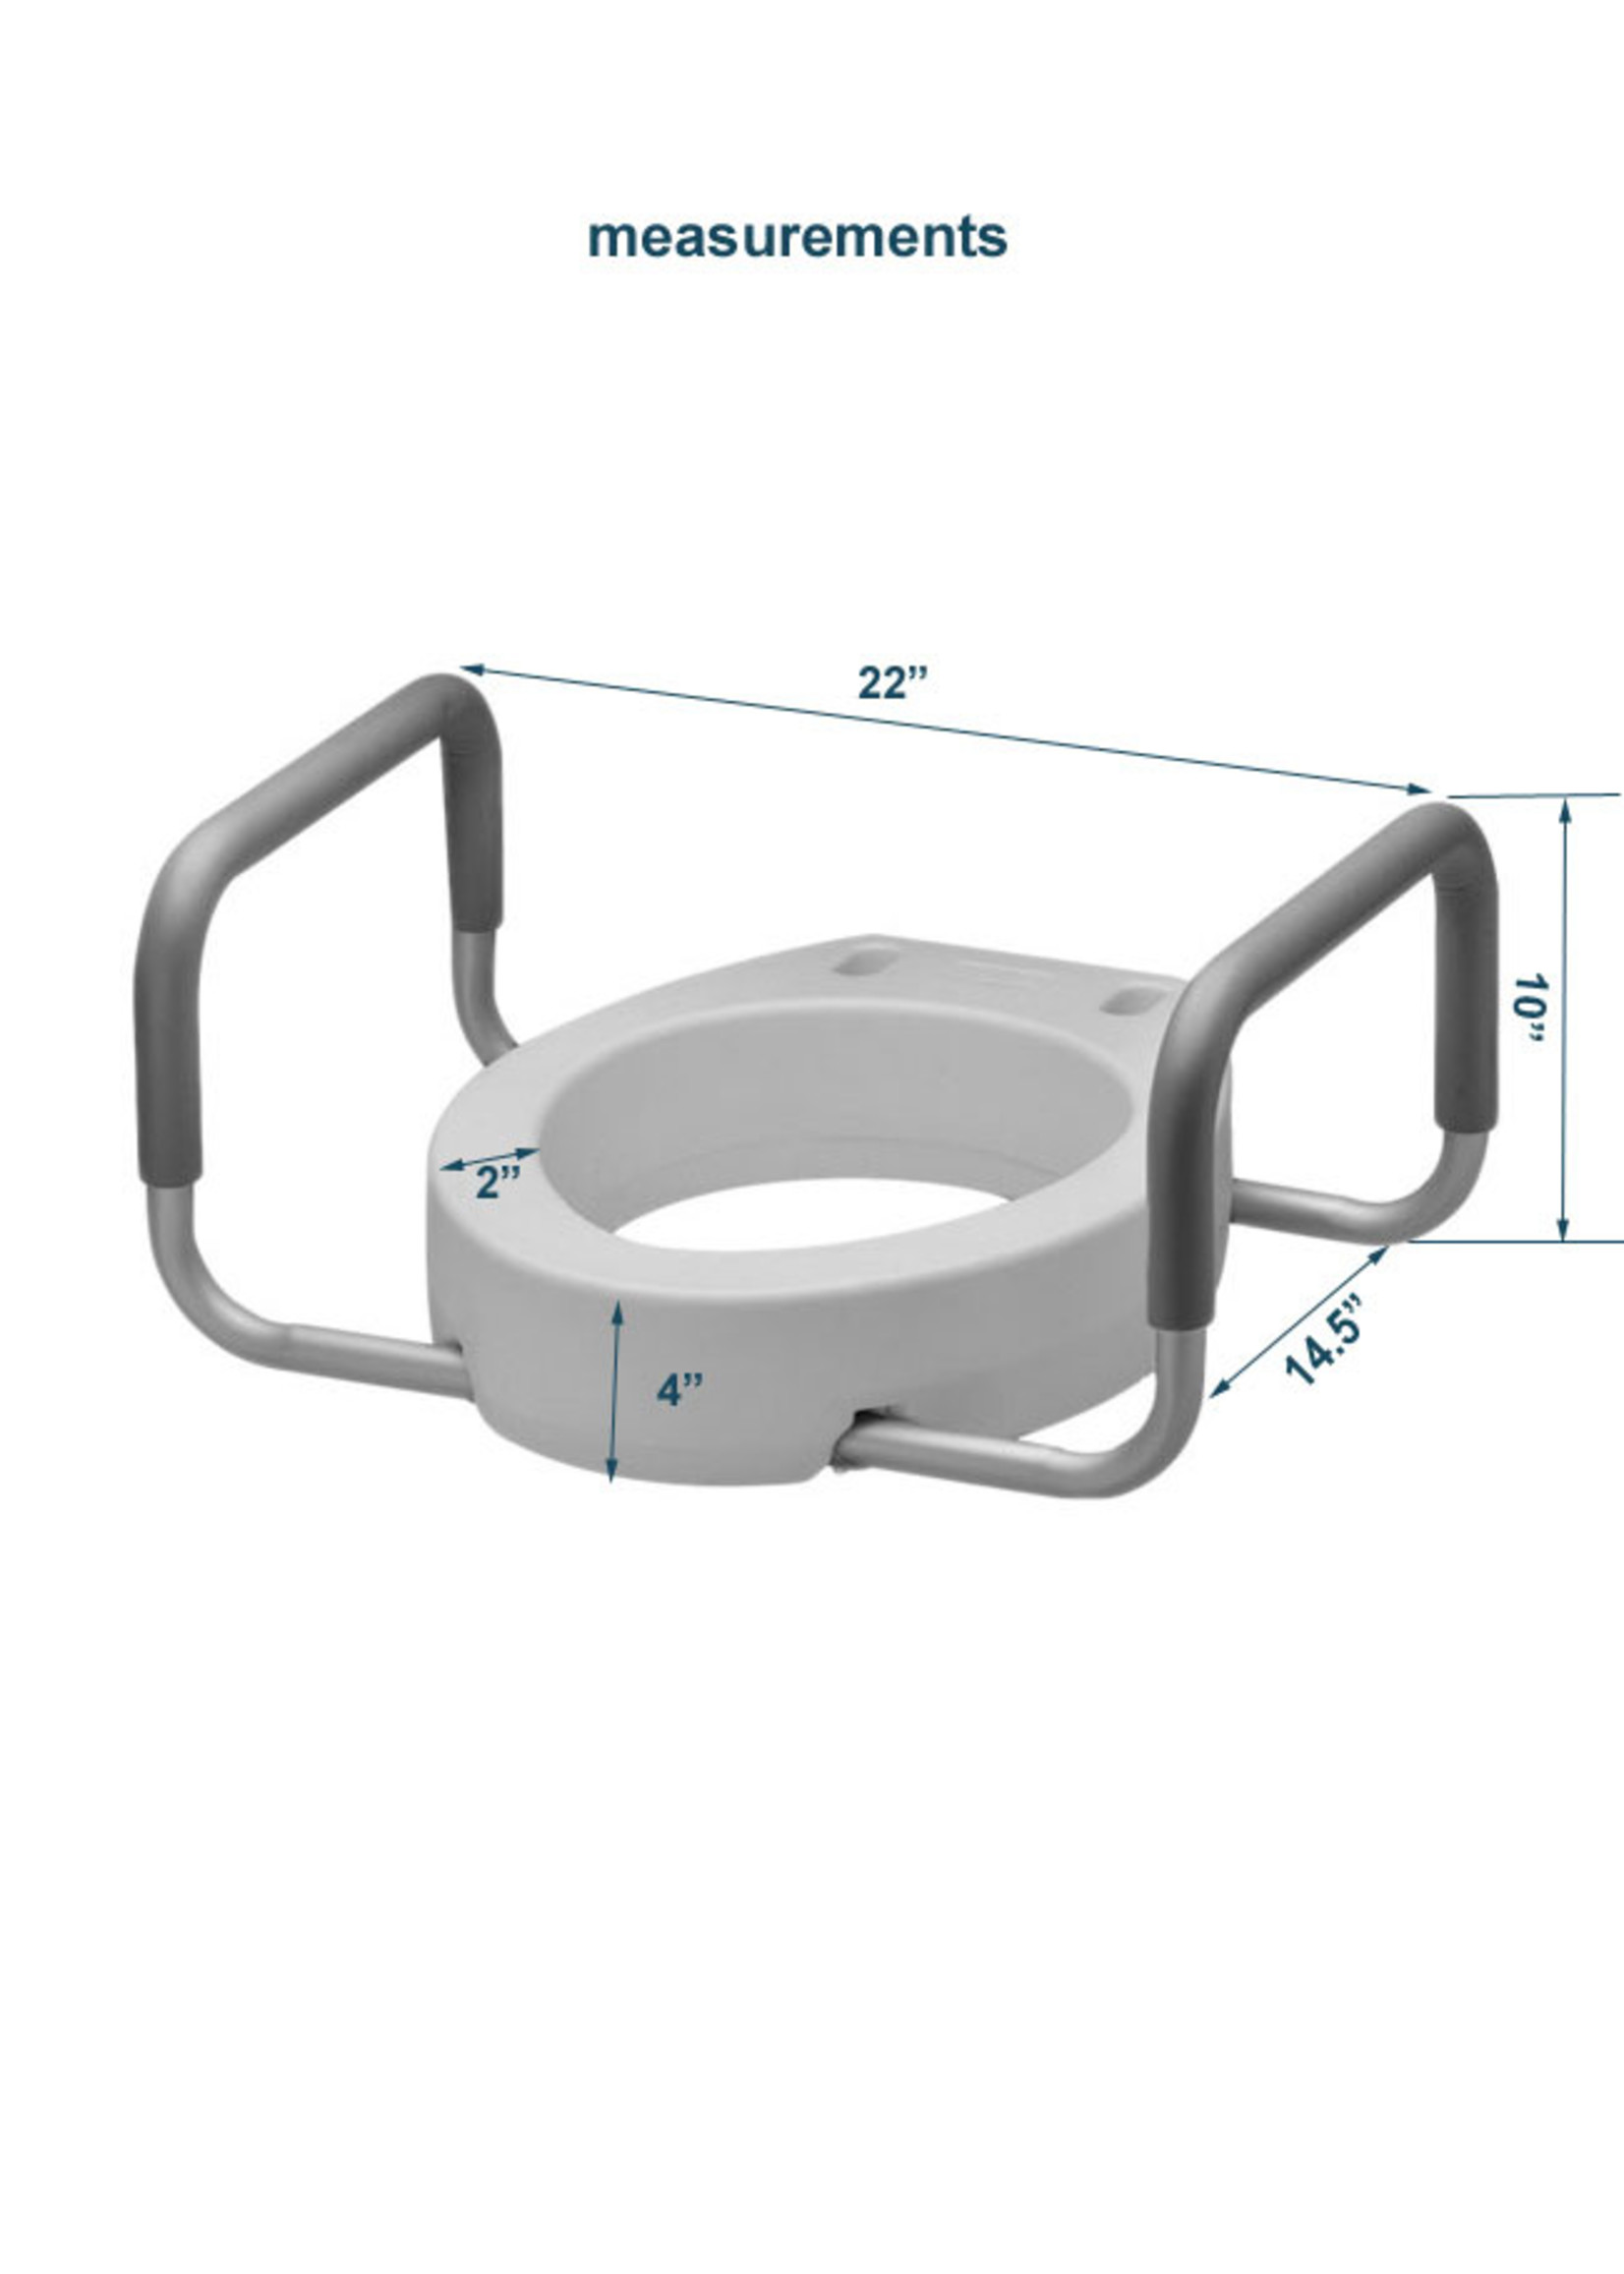 MOBB Raised Toilet Seat, 4" with removable arms